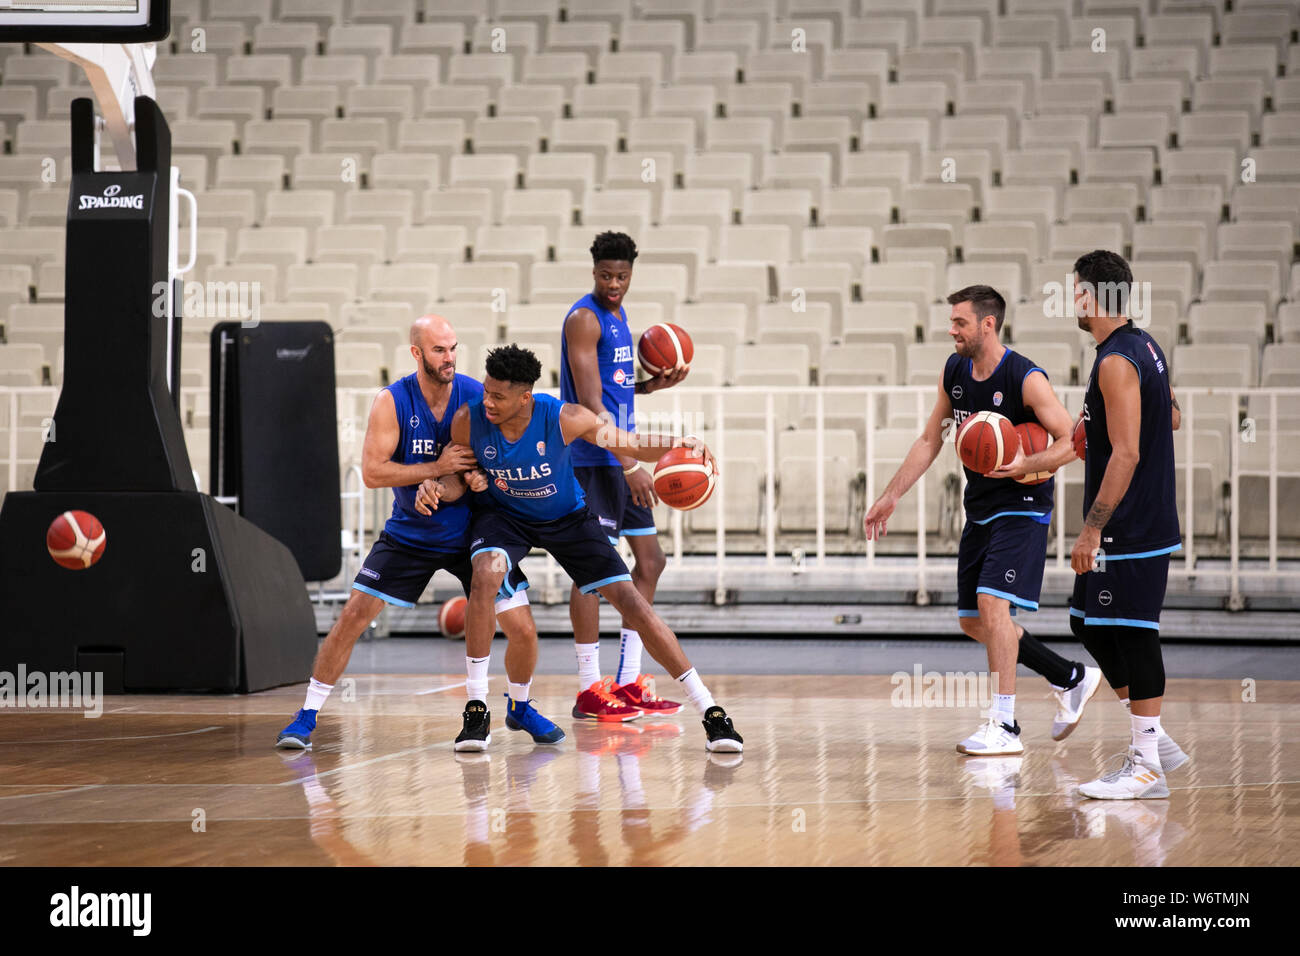 Athens. 2nd Aug, 2019. Greek national basketball team player Giannis  Antetokounmpo (2nd L) attends a training session for the upcoming 2019 FIBA  World Cup in China at the Olympic Athletic Center of